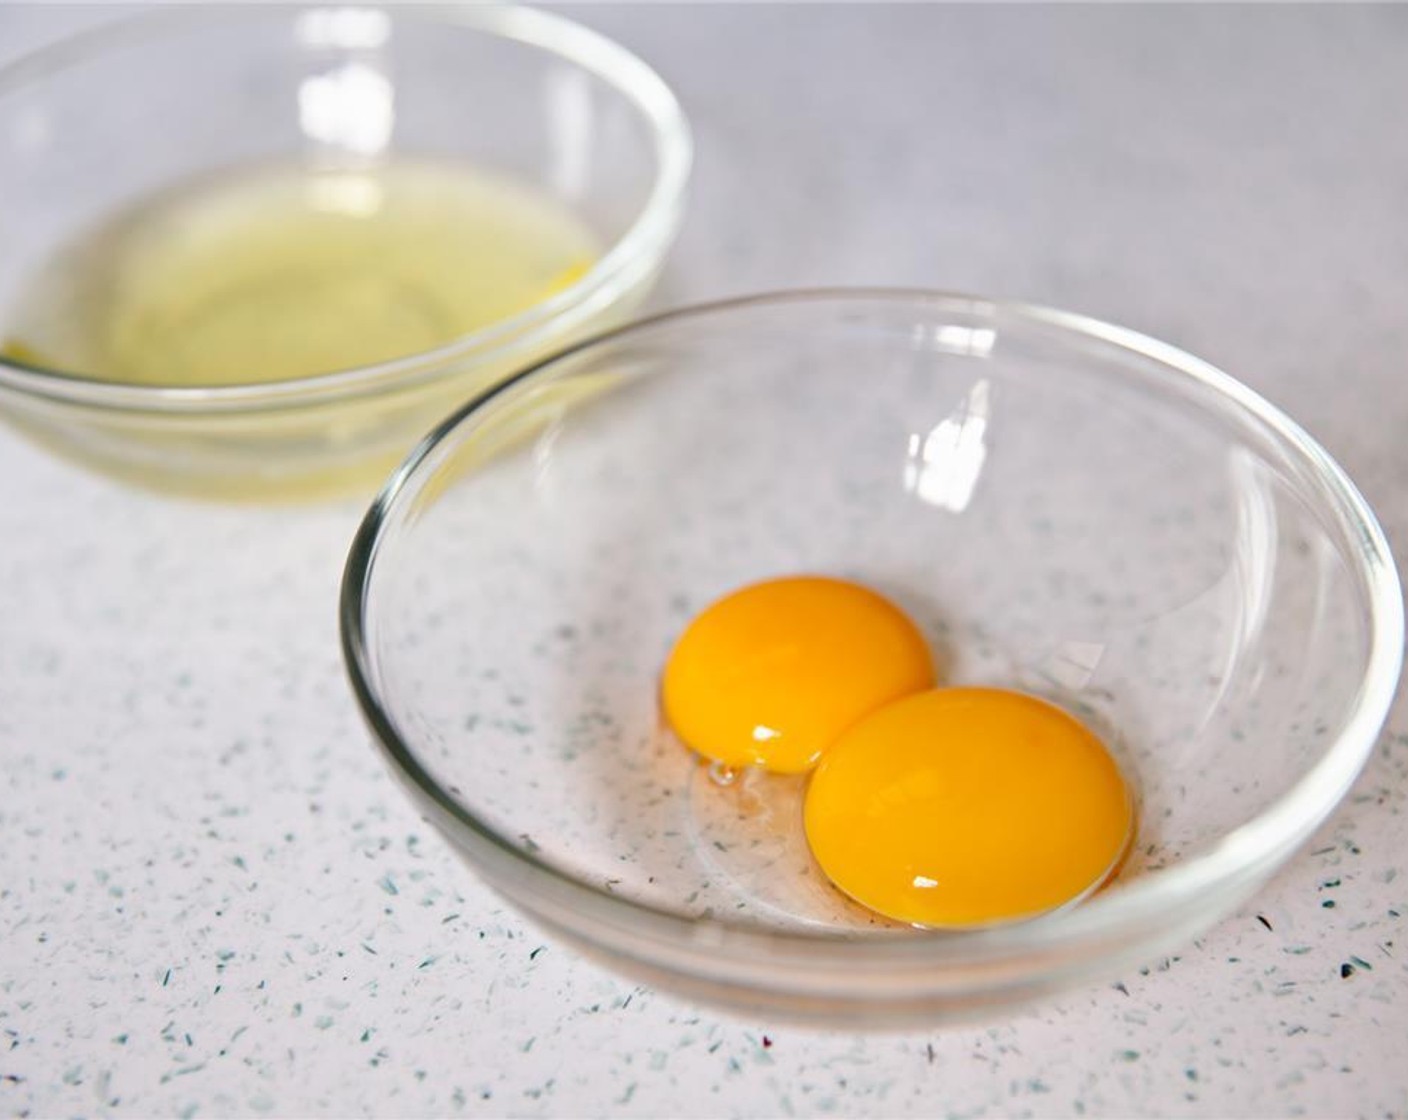 step 2 Place egg yolks in another bowl.